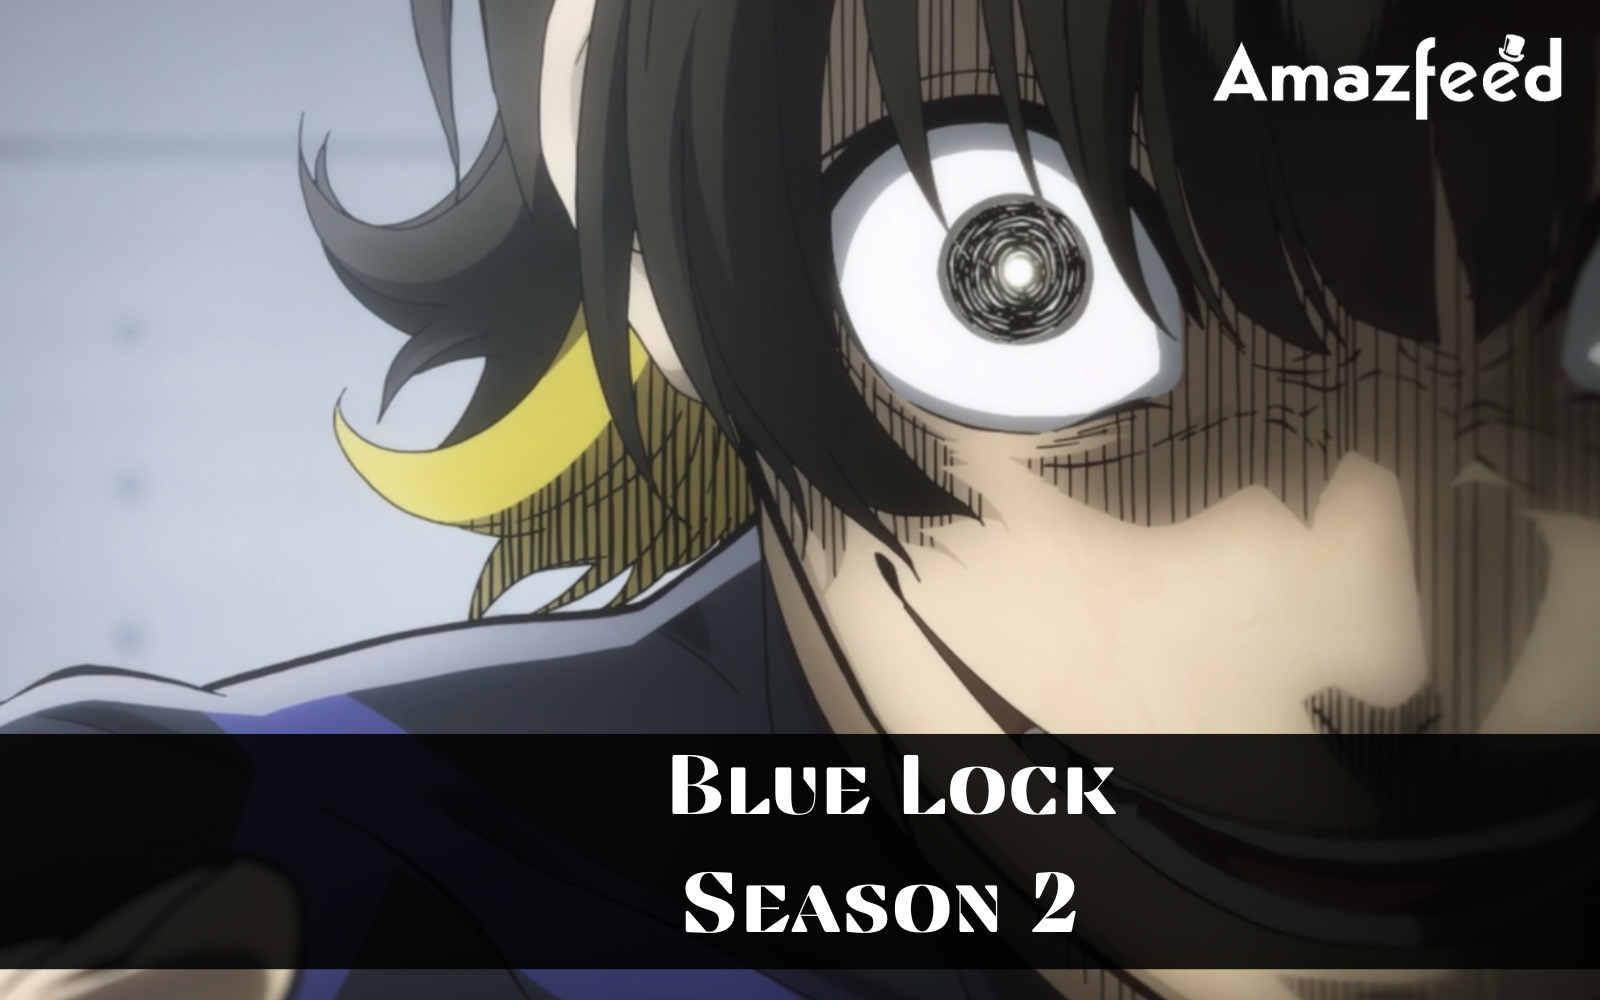 Blue Lock season 2 release date speculation, trailer and latest